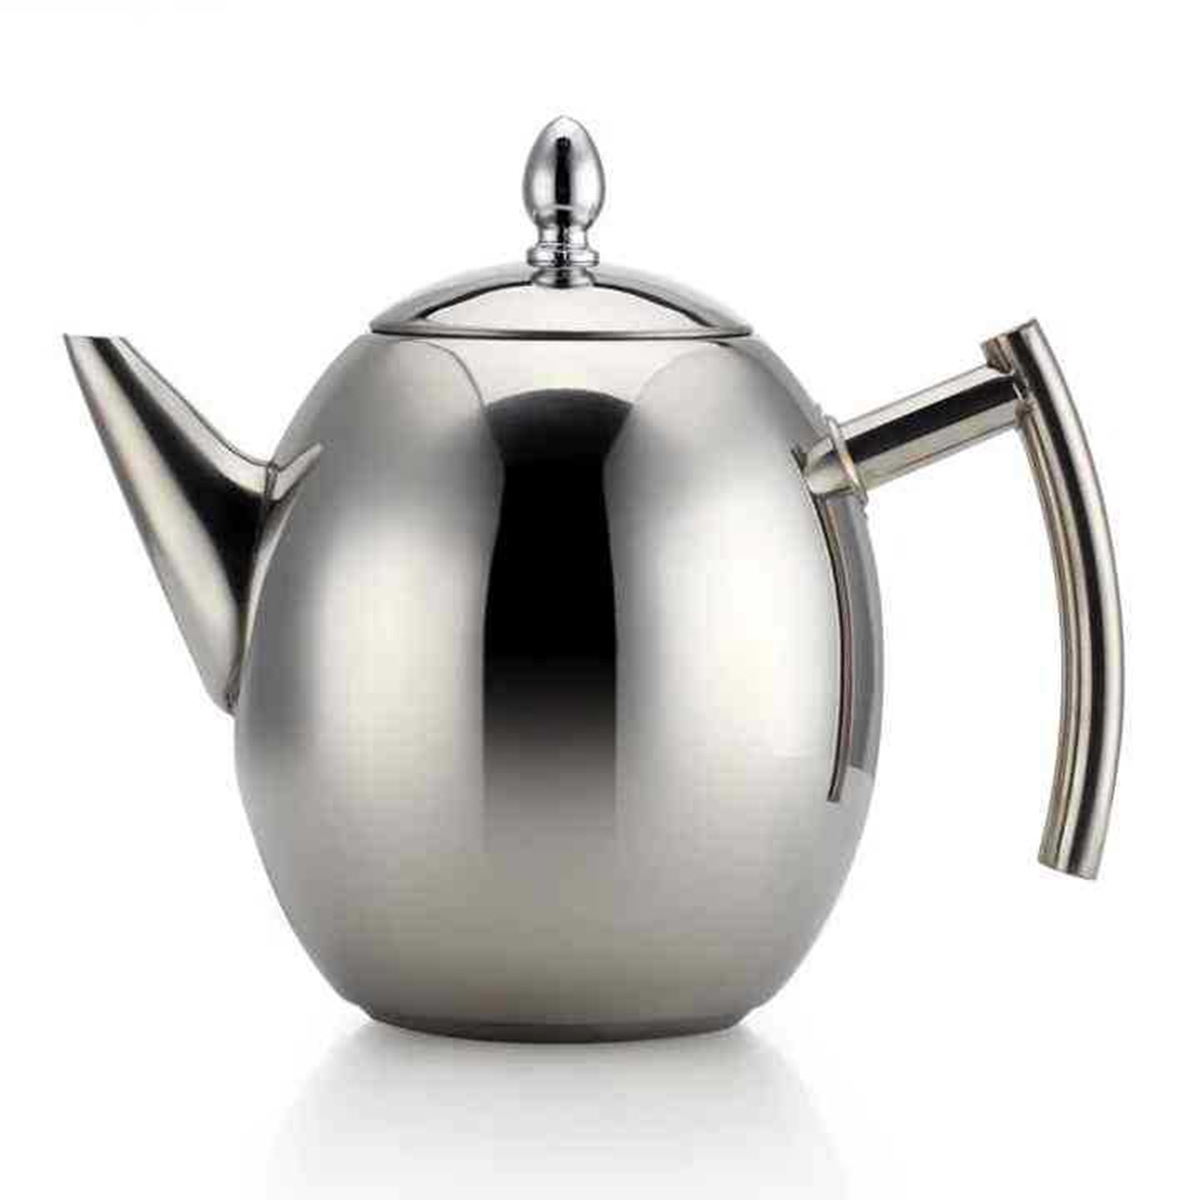 

1L 1.5L Stainless Steel Coffee Pour Over Kettle Drip Tea Pot W/ Filter Strainer Coffee Tea Sets